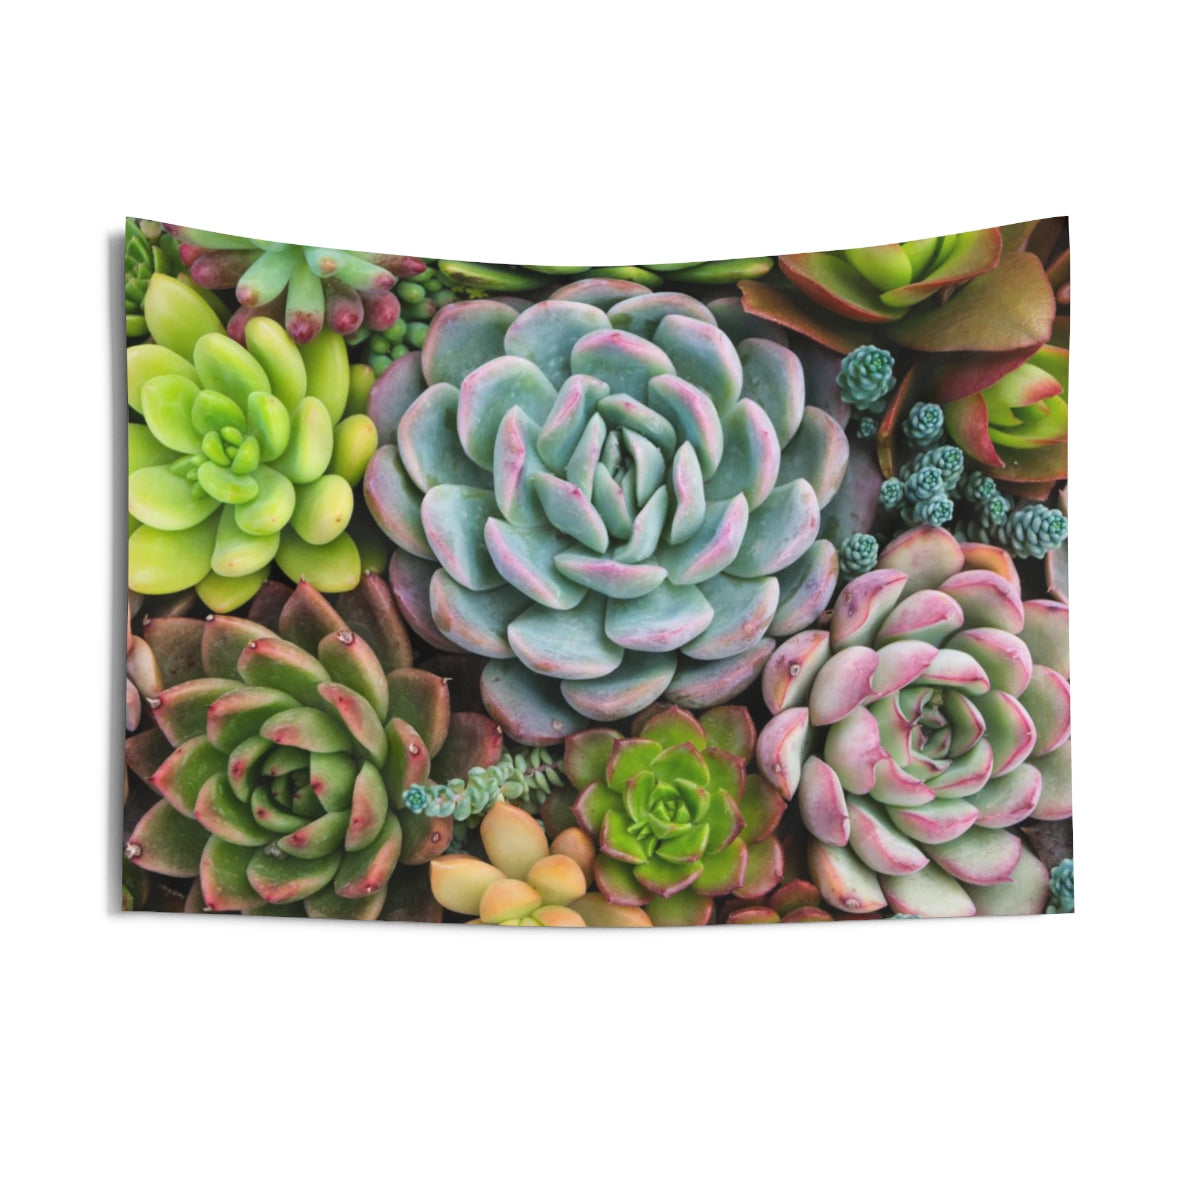 Cactus Tapestry, Succulent Botanic Plants, Nature Landscape Indoor Wall Art Hanging Tapestries Decor Home Dorm Room Gift Starcove Fashion